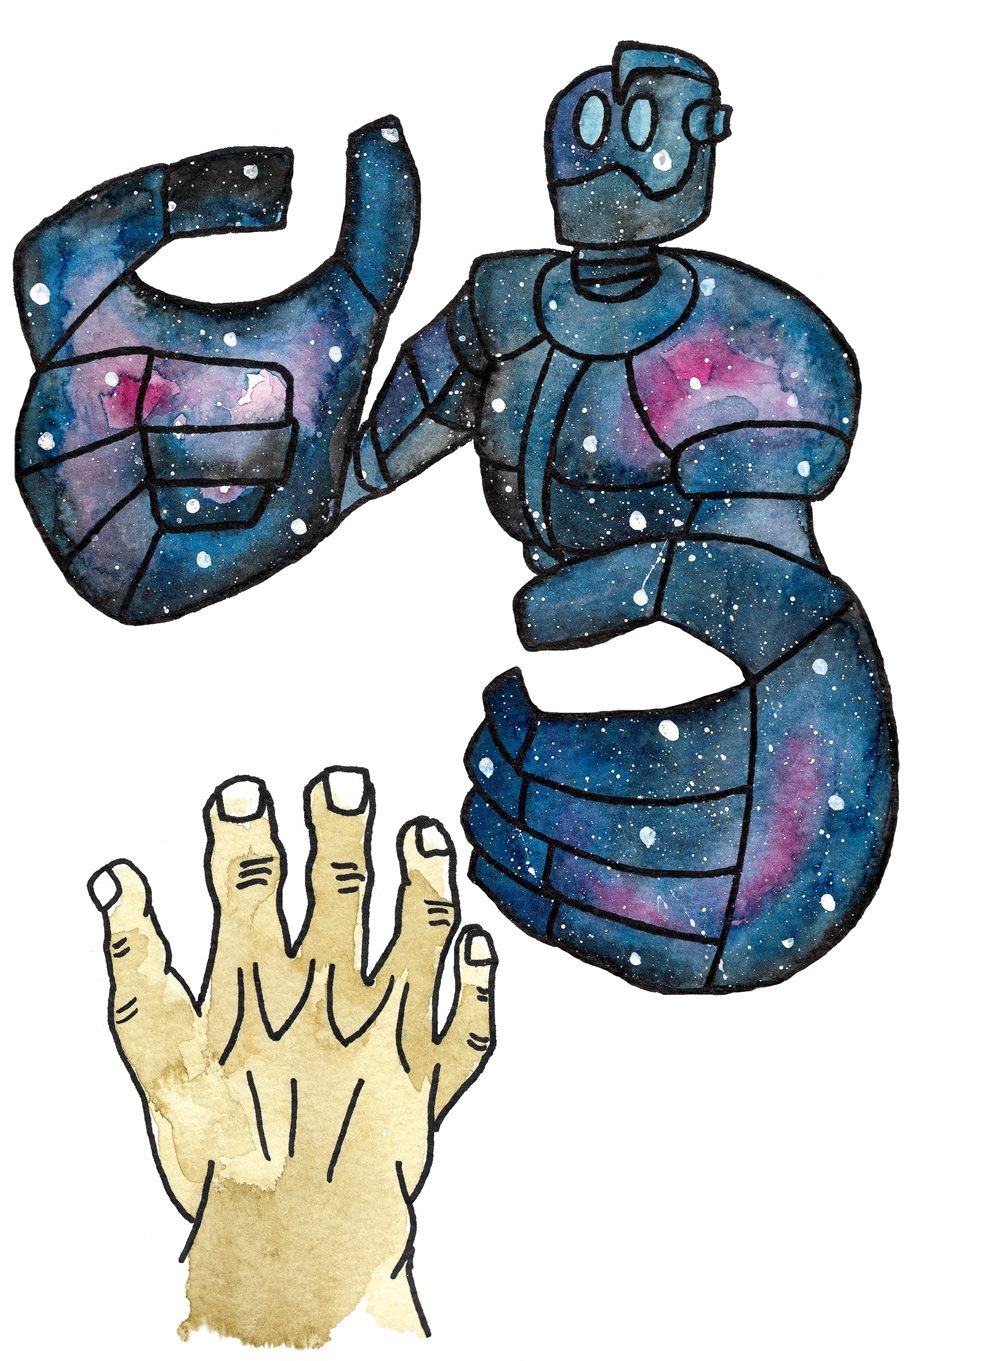 Watercolour drawing of large robot in shades of blue and pink reaching out his hands to another hand.